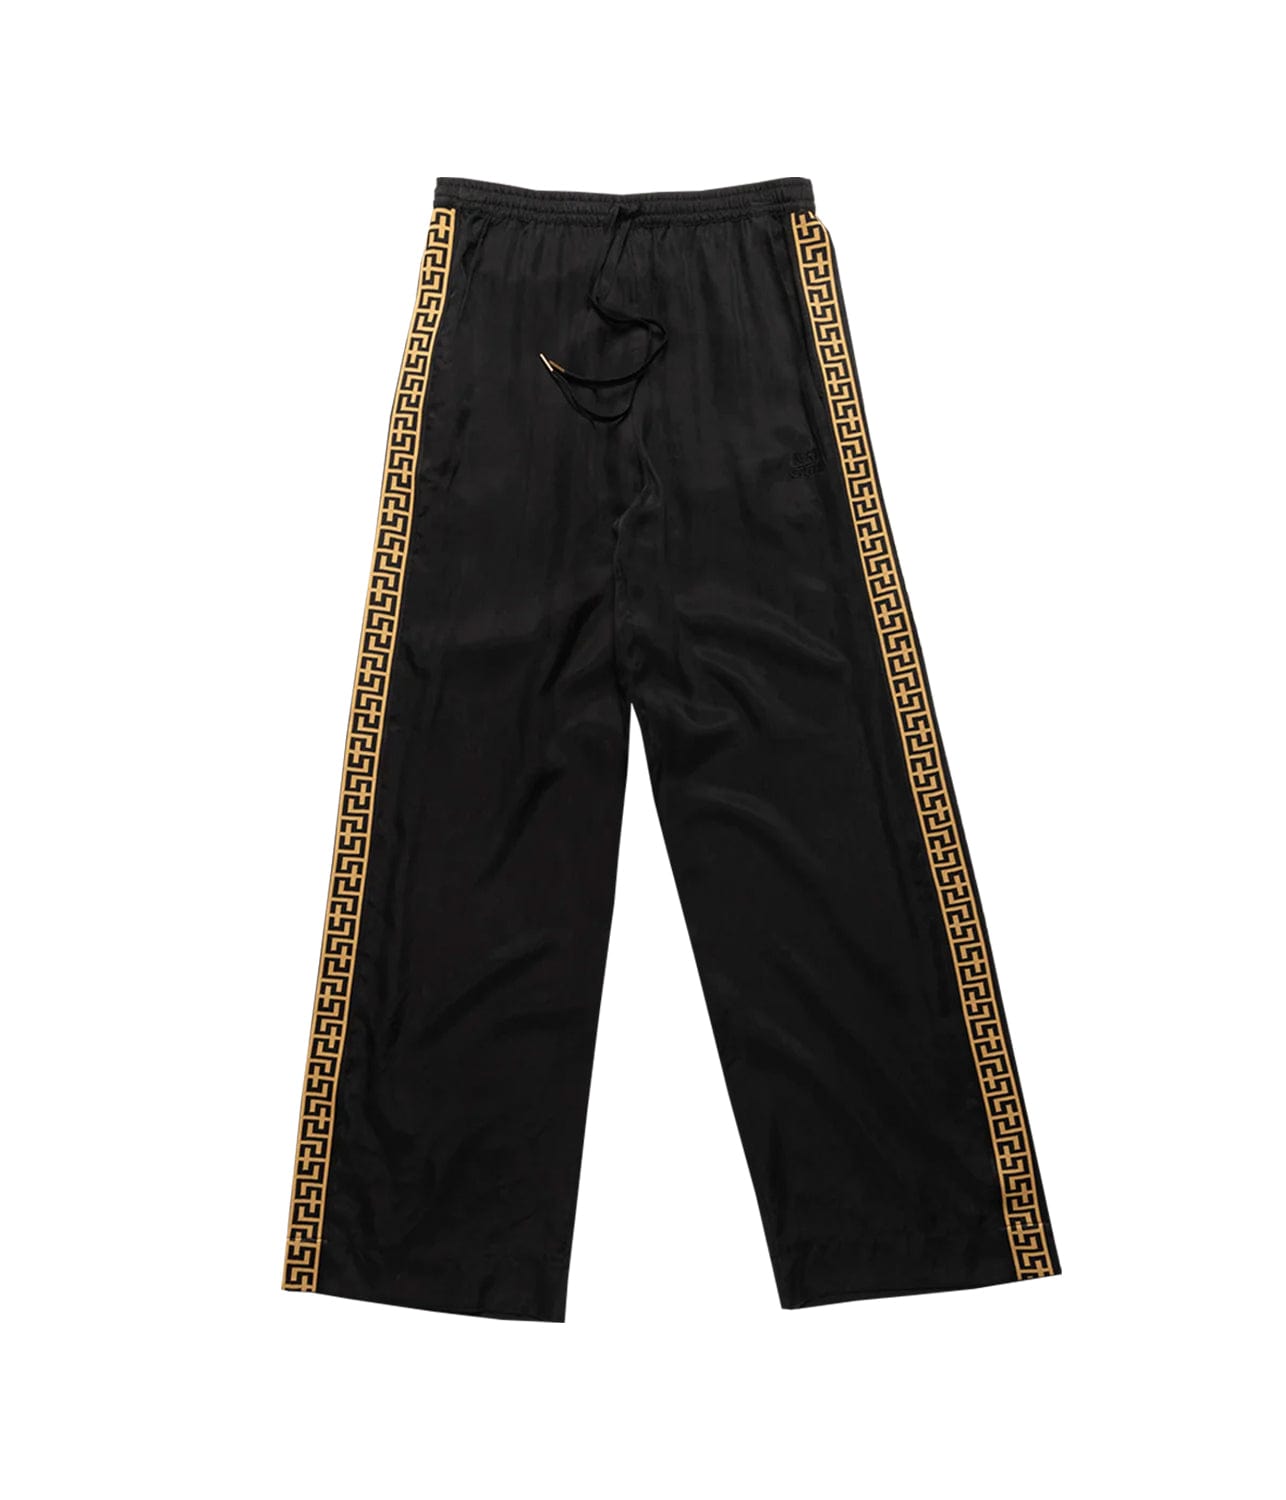 SOMETHING VERY SPECIAL BLACK GOLD "GEO" VACAY PANTS